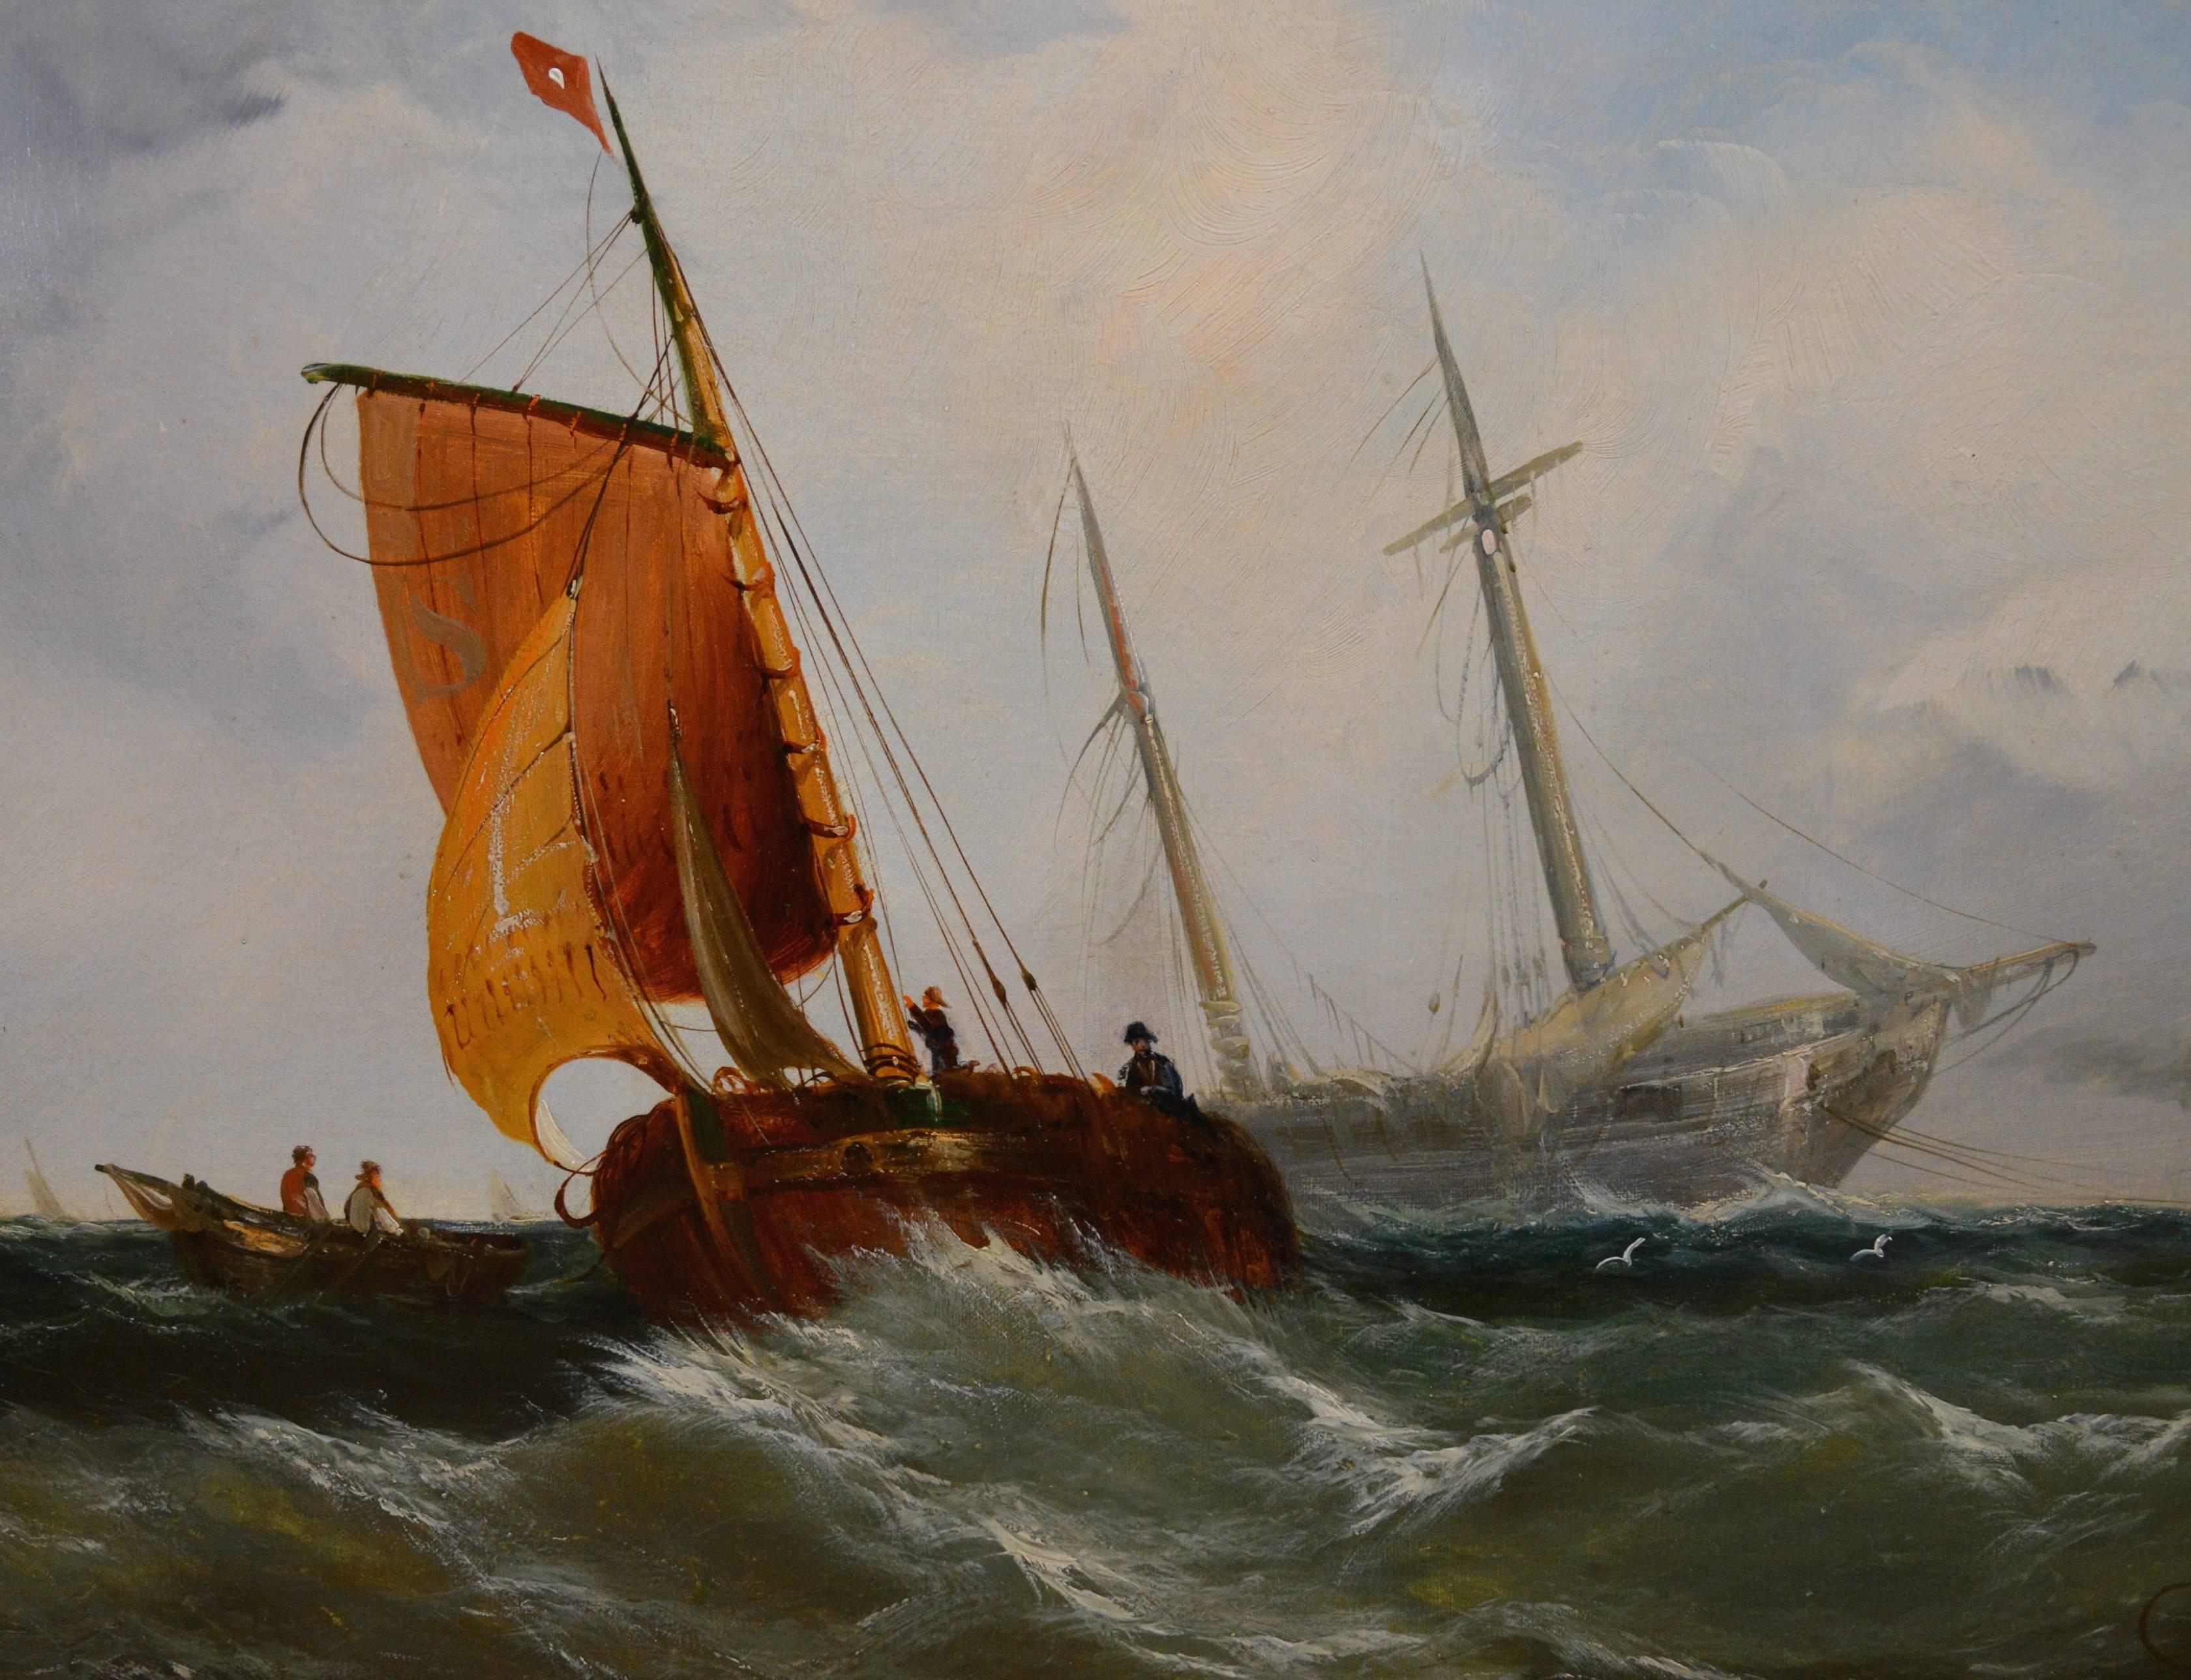 A very large, fine mid-19th century seascape depicting shipping ‘On the Medway’ with a disabled battle ship being towed into port by the eminent Victorian artist William Adolphus Knell (1801-1875). This important English maritime painting is signed